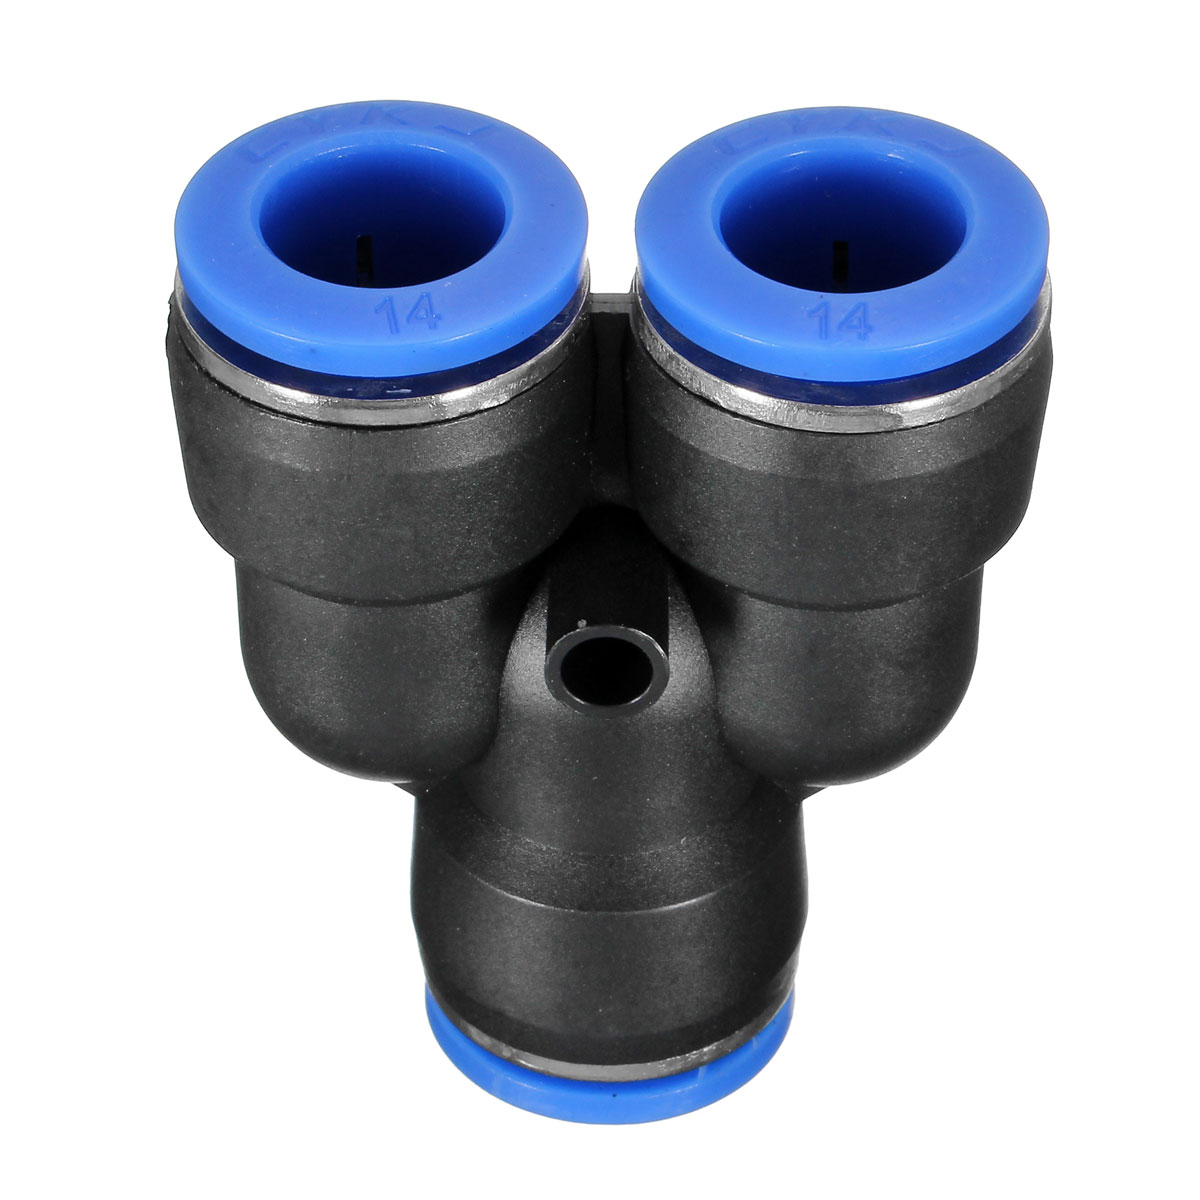 Pneumatic-Push-In-Fittings-For-Air-Water-Hose-Pipe-Connectors-Tube-Connector-1030560-10